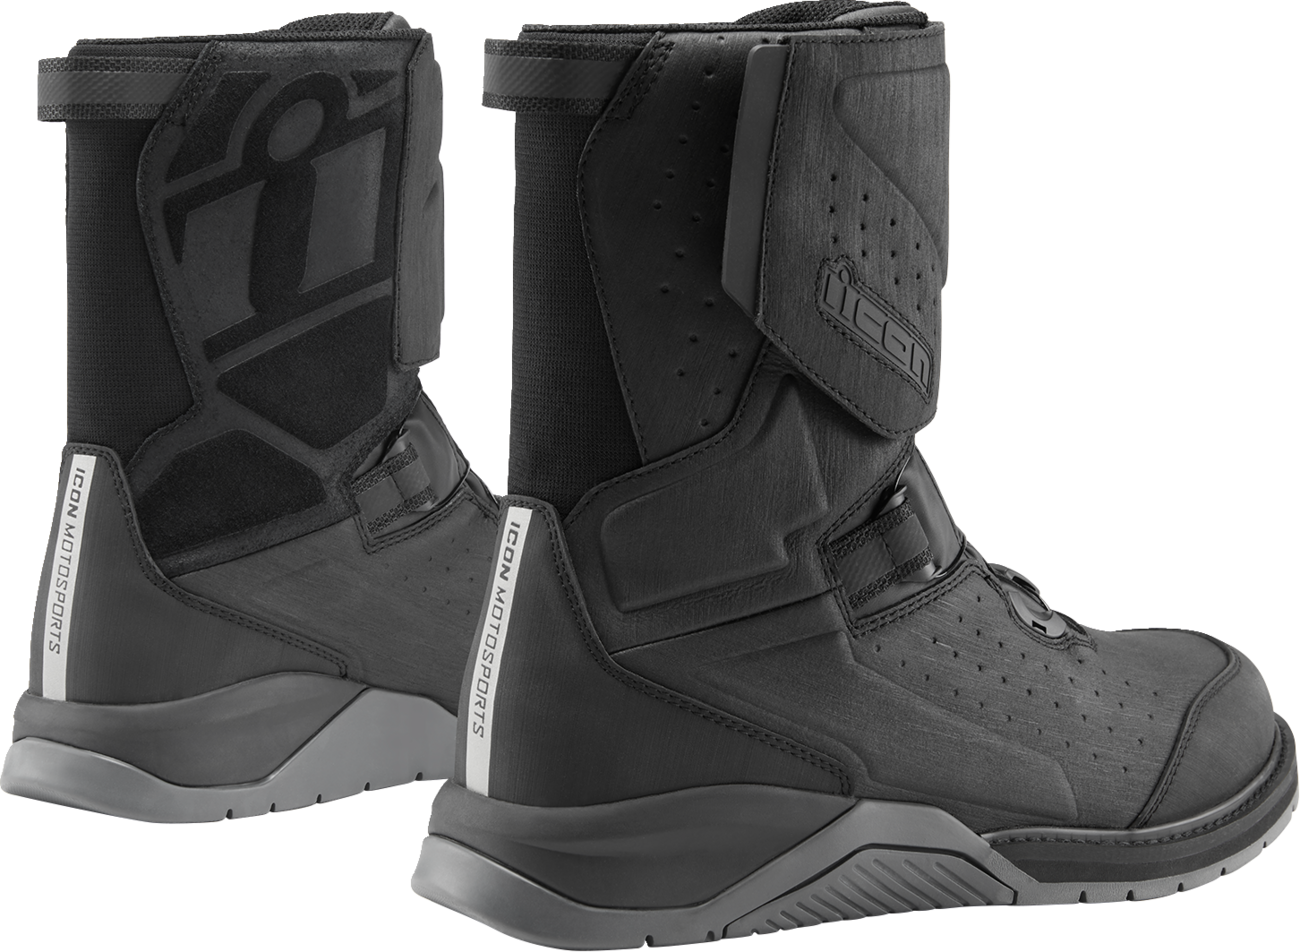 ICON Alcan Waterproof Boots - Black - Size 13 3403-1242